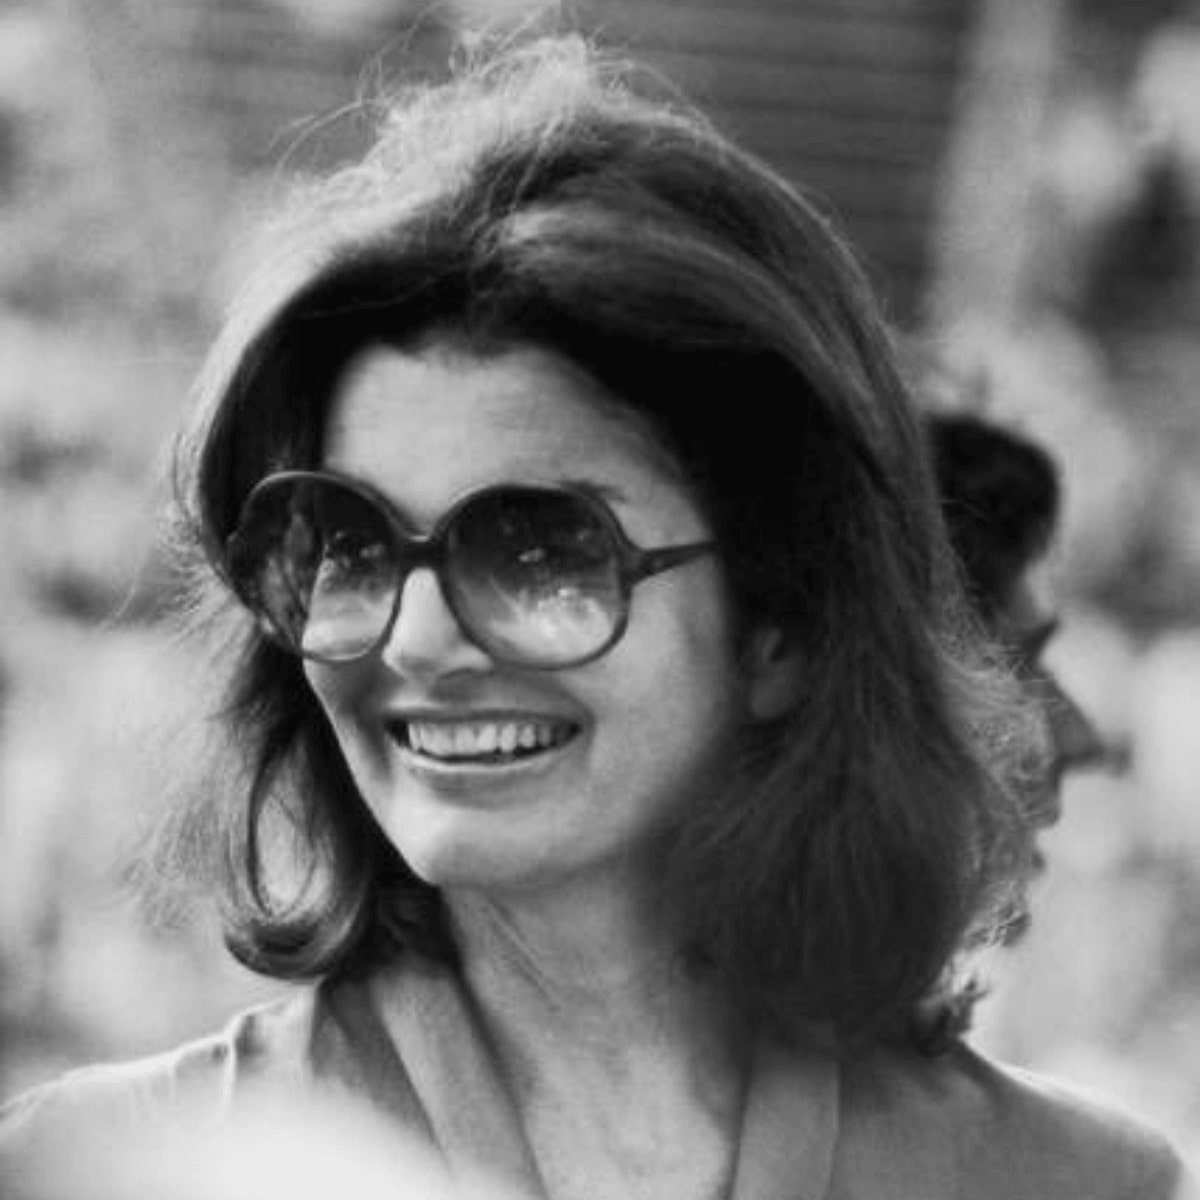 jackie o in sunglasses during a tennis tournament